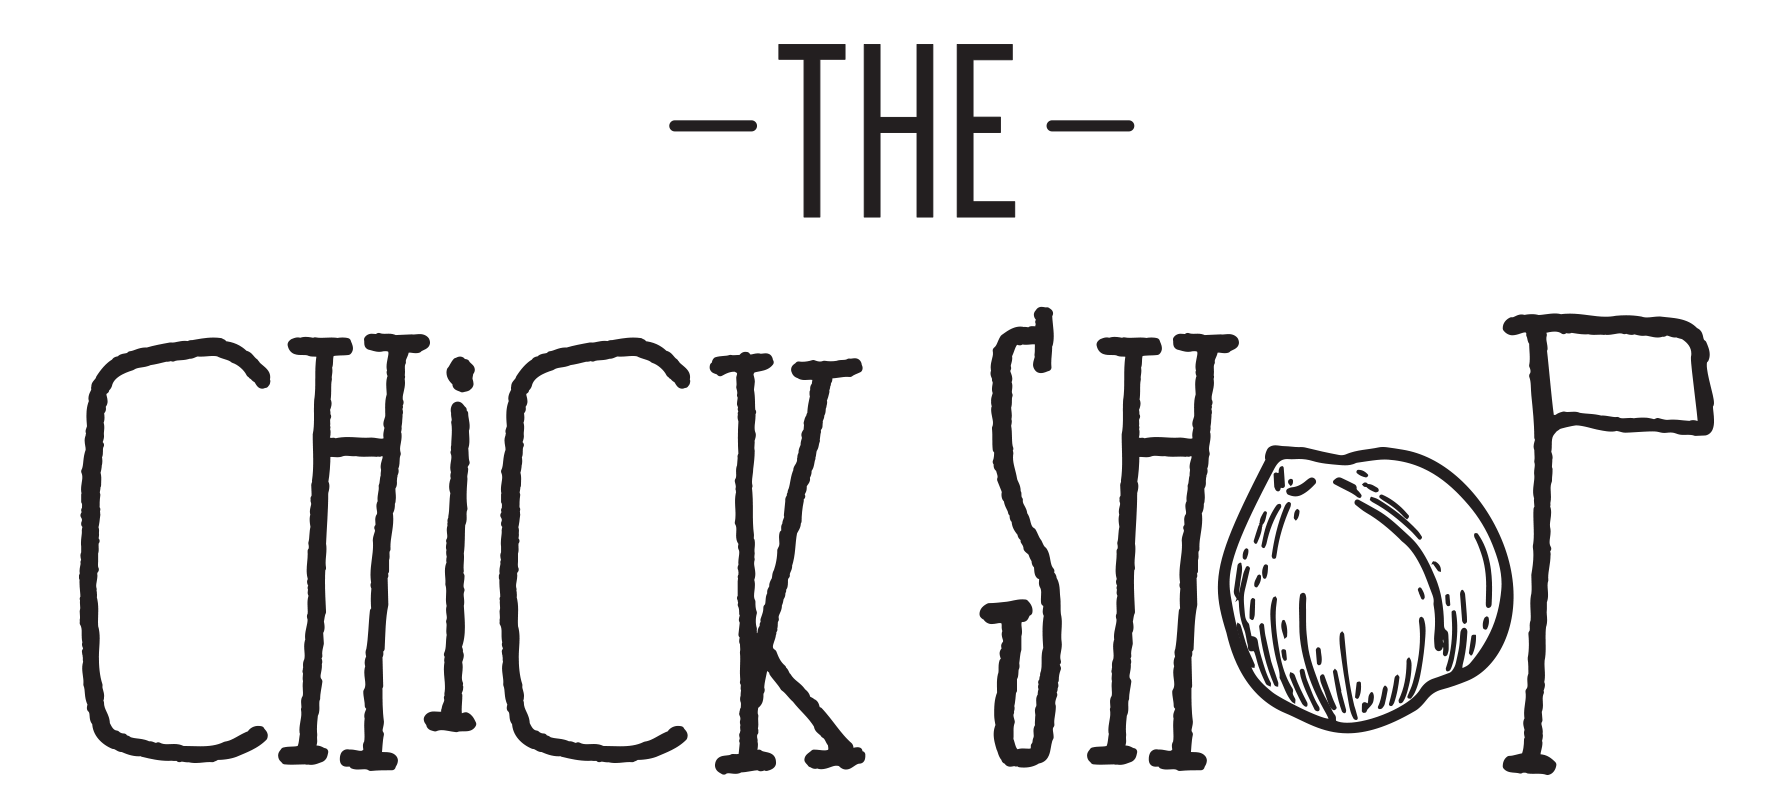 The Chick Shop